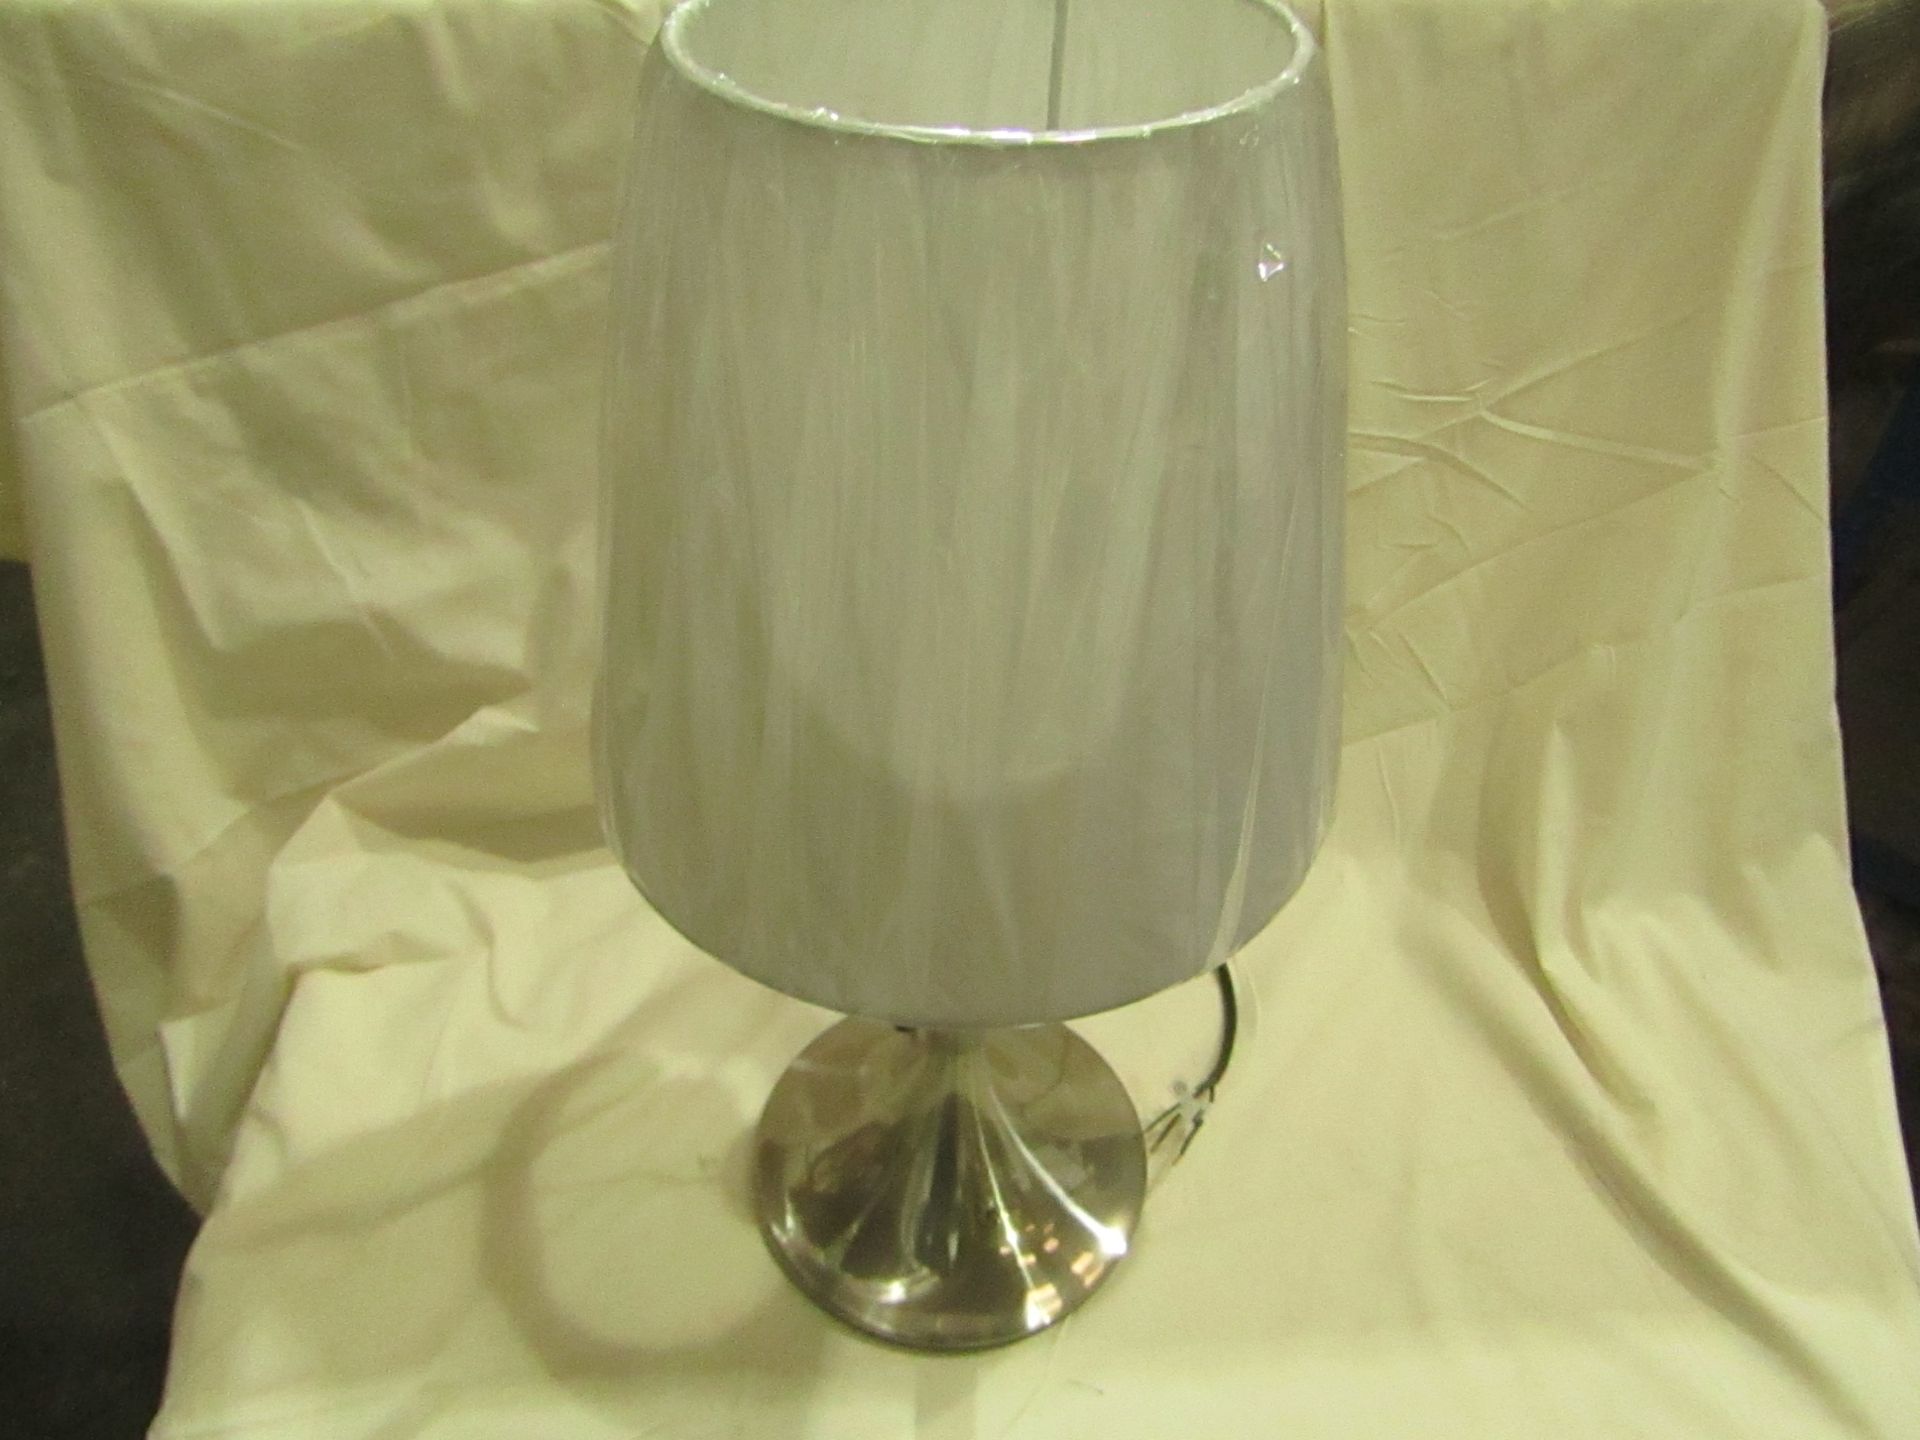 Chelsom - Metal Table Lamp - Shade Included - No Plug, No Visible Damages & Boxed.